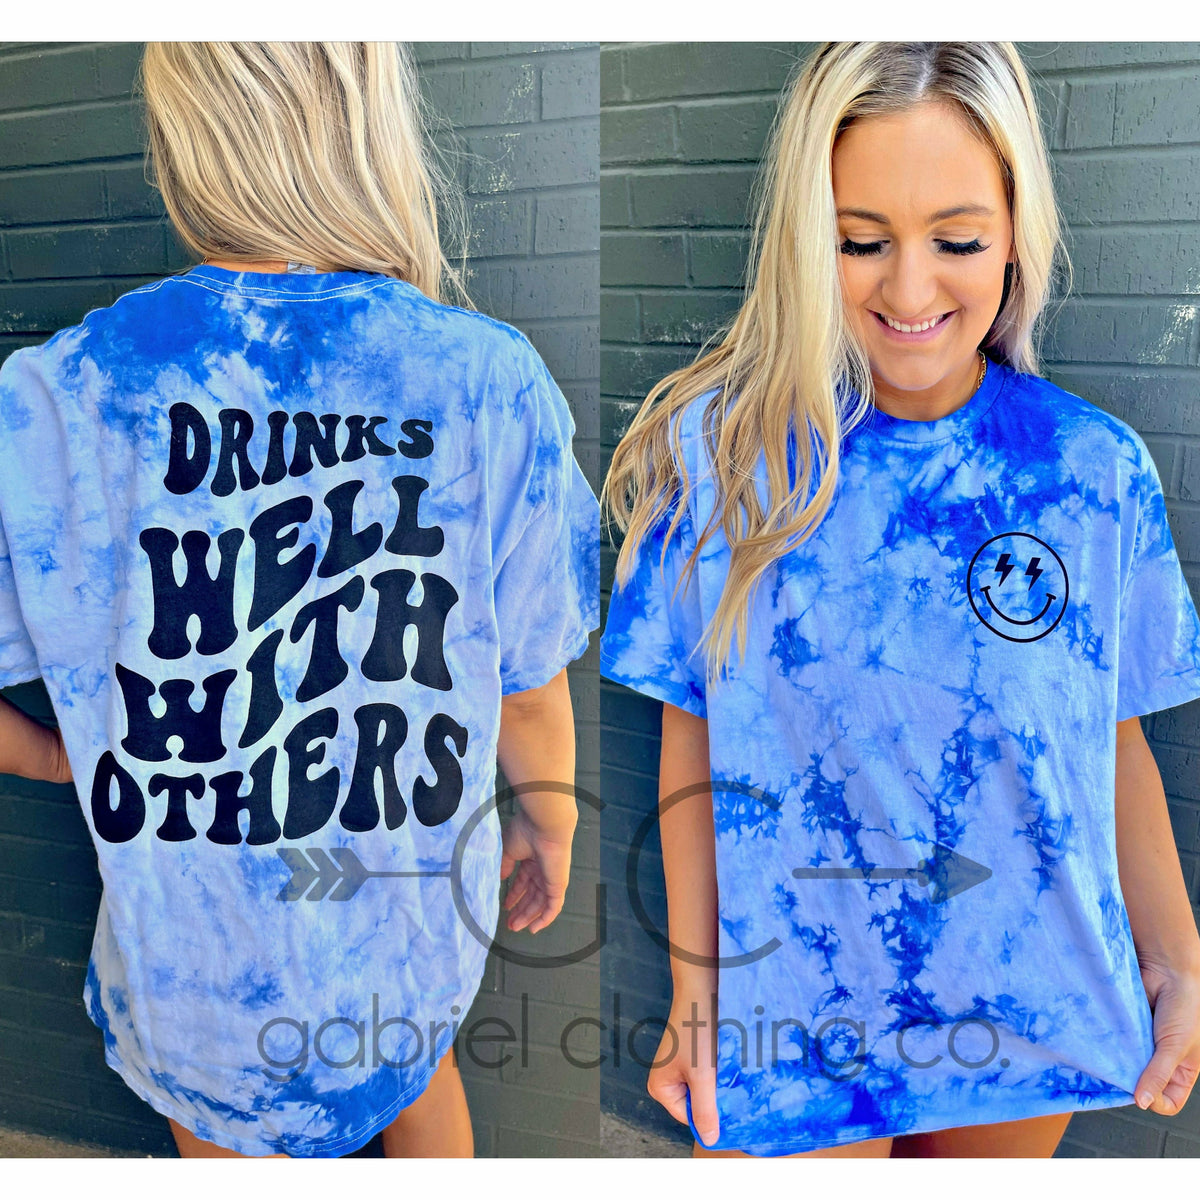 Drinks well with others Blue Tie Dye tee